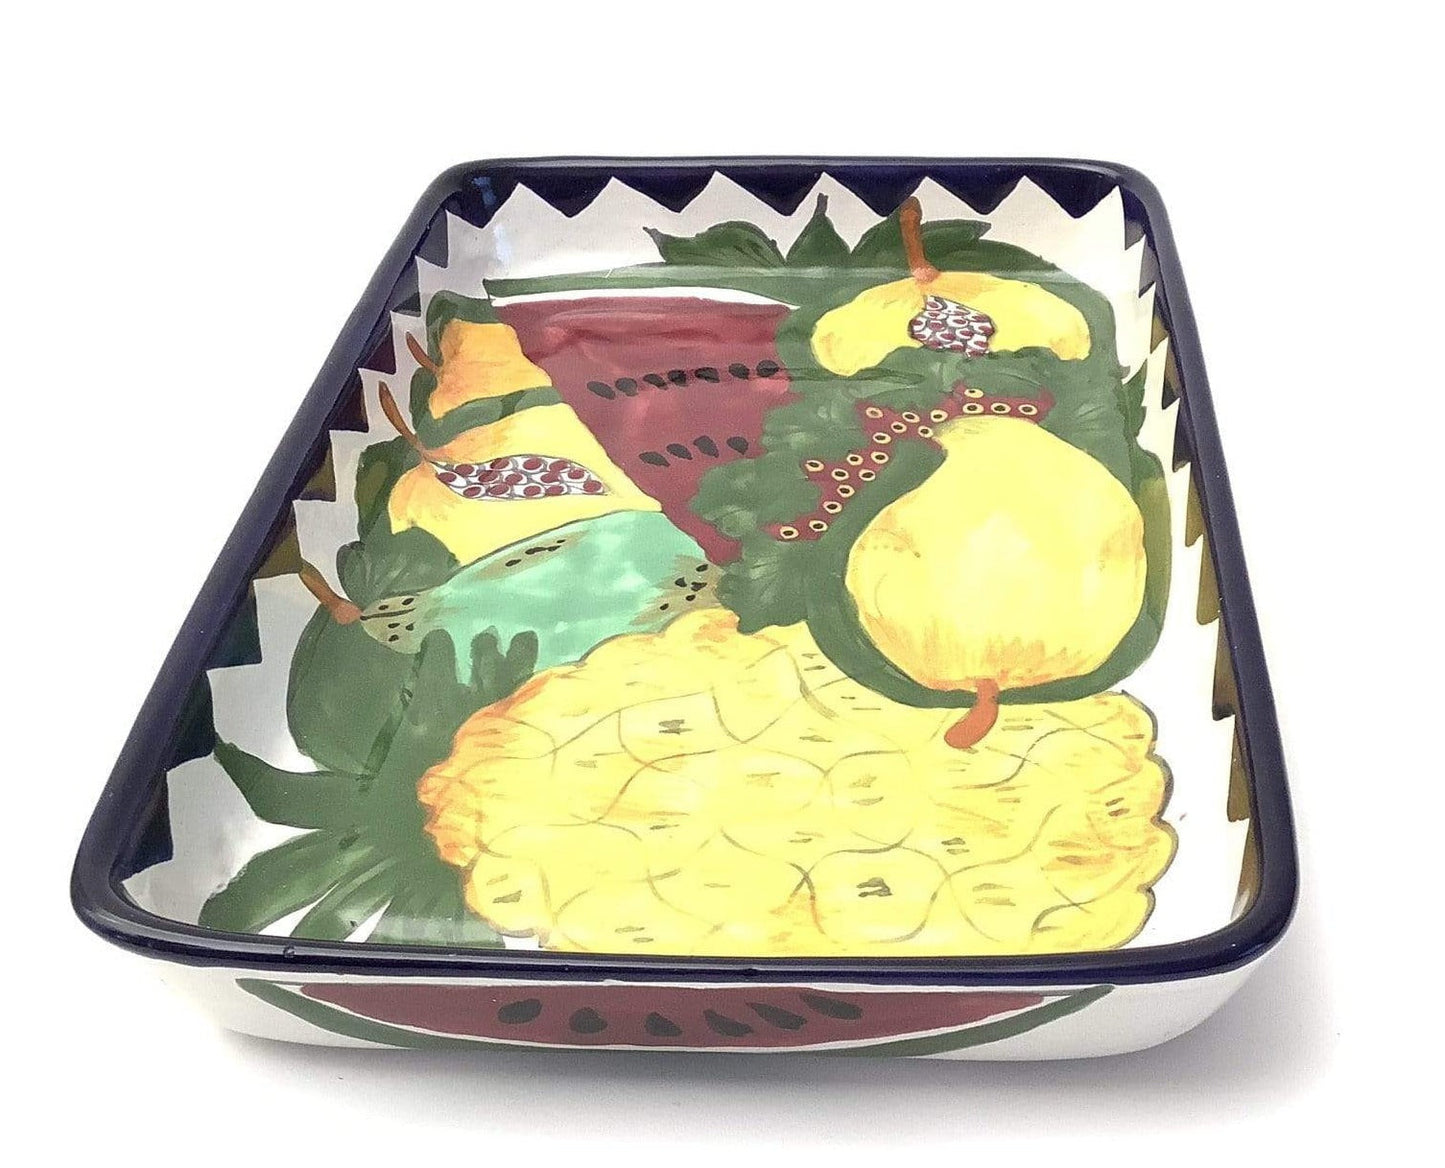 Colorful Ethnic Serving Dish